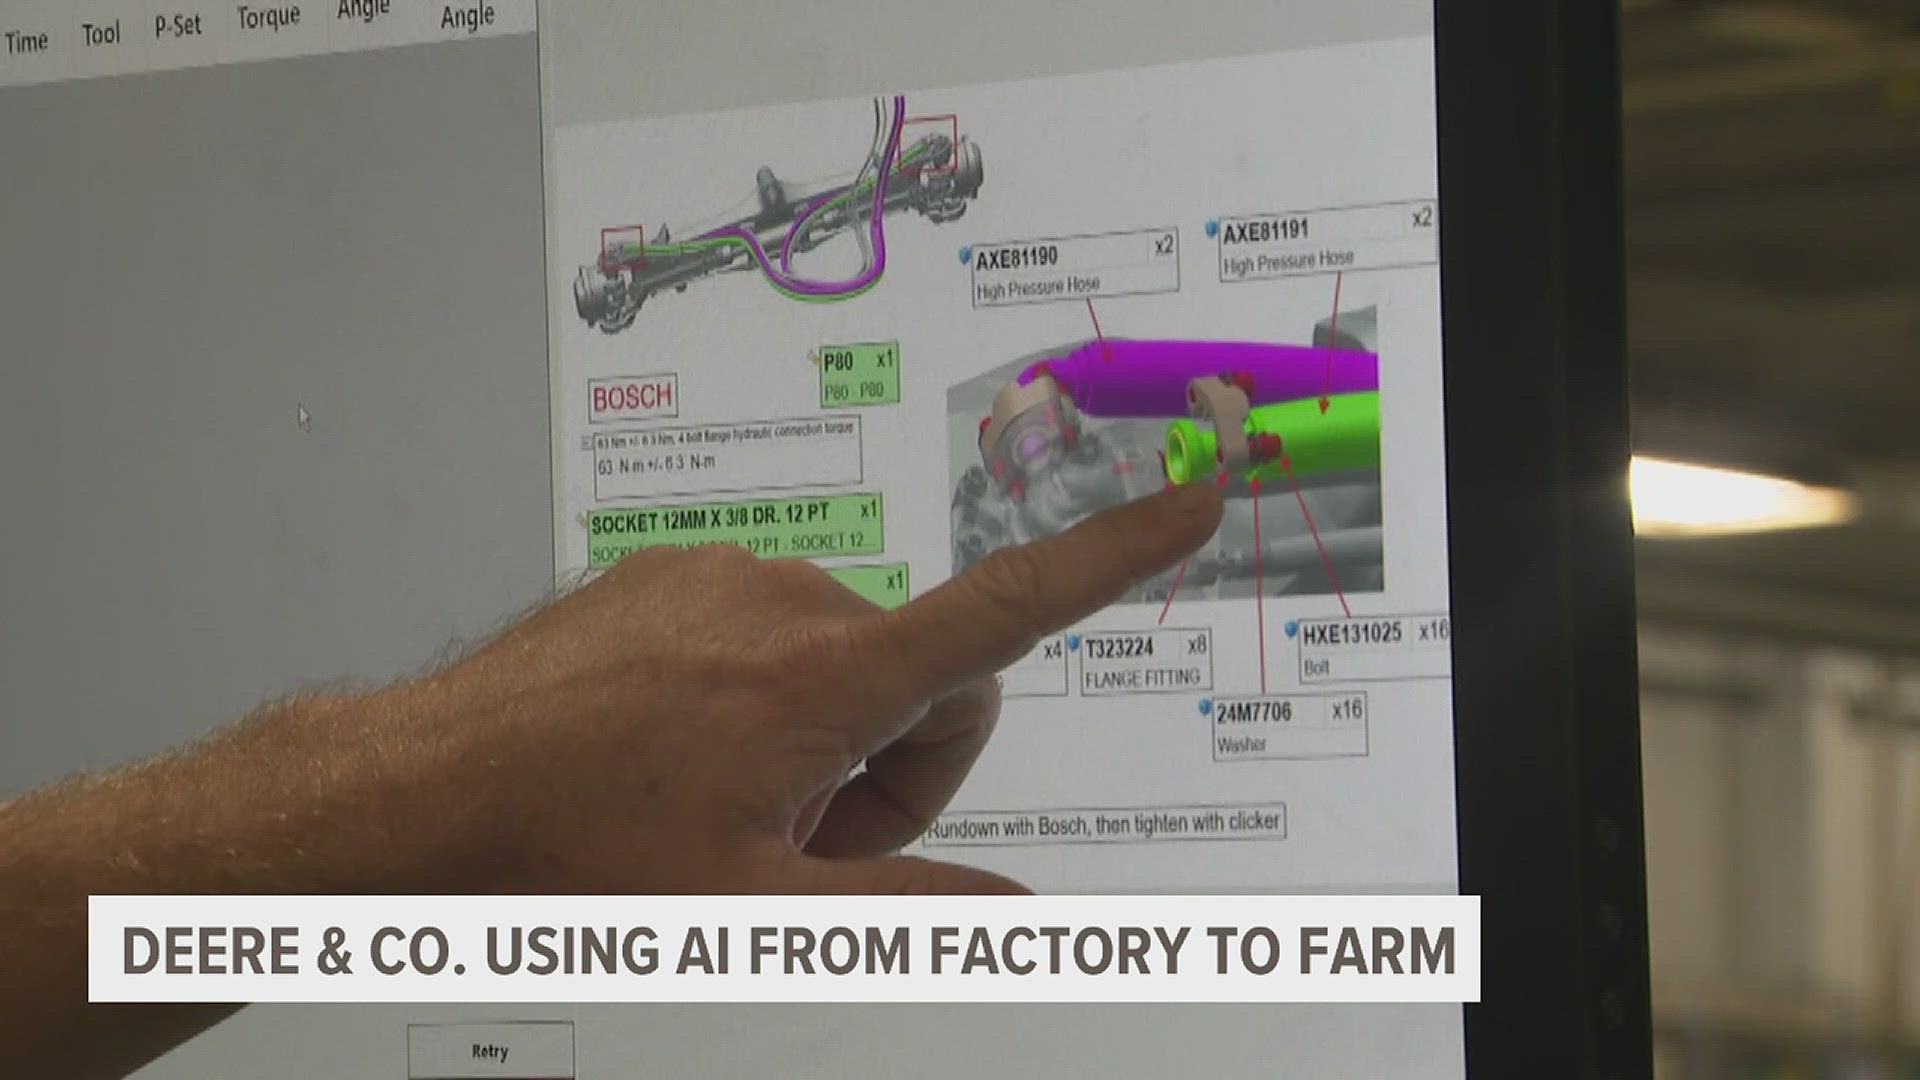 News 8's David Bohlman takes us to a John Deere factory to see how this agriculture company is integrating artificial intelligence technology.